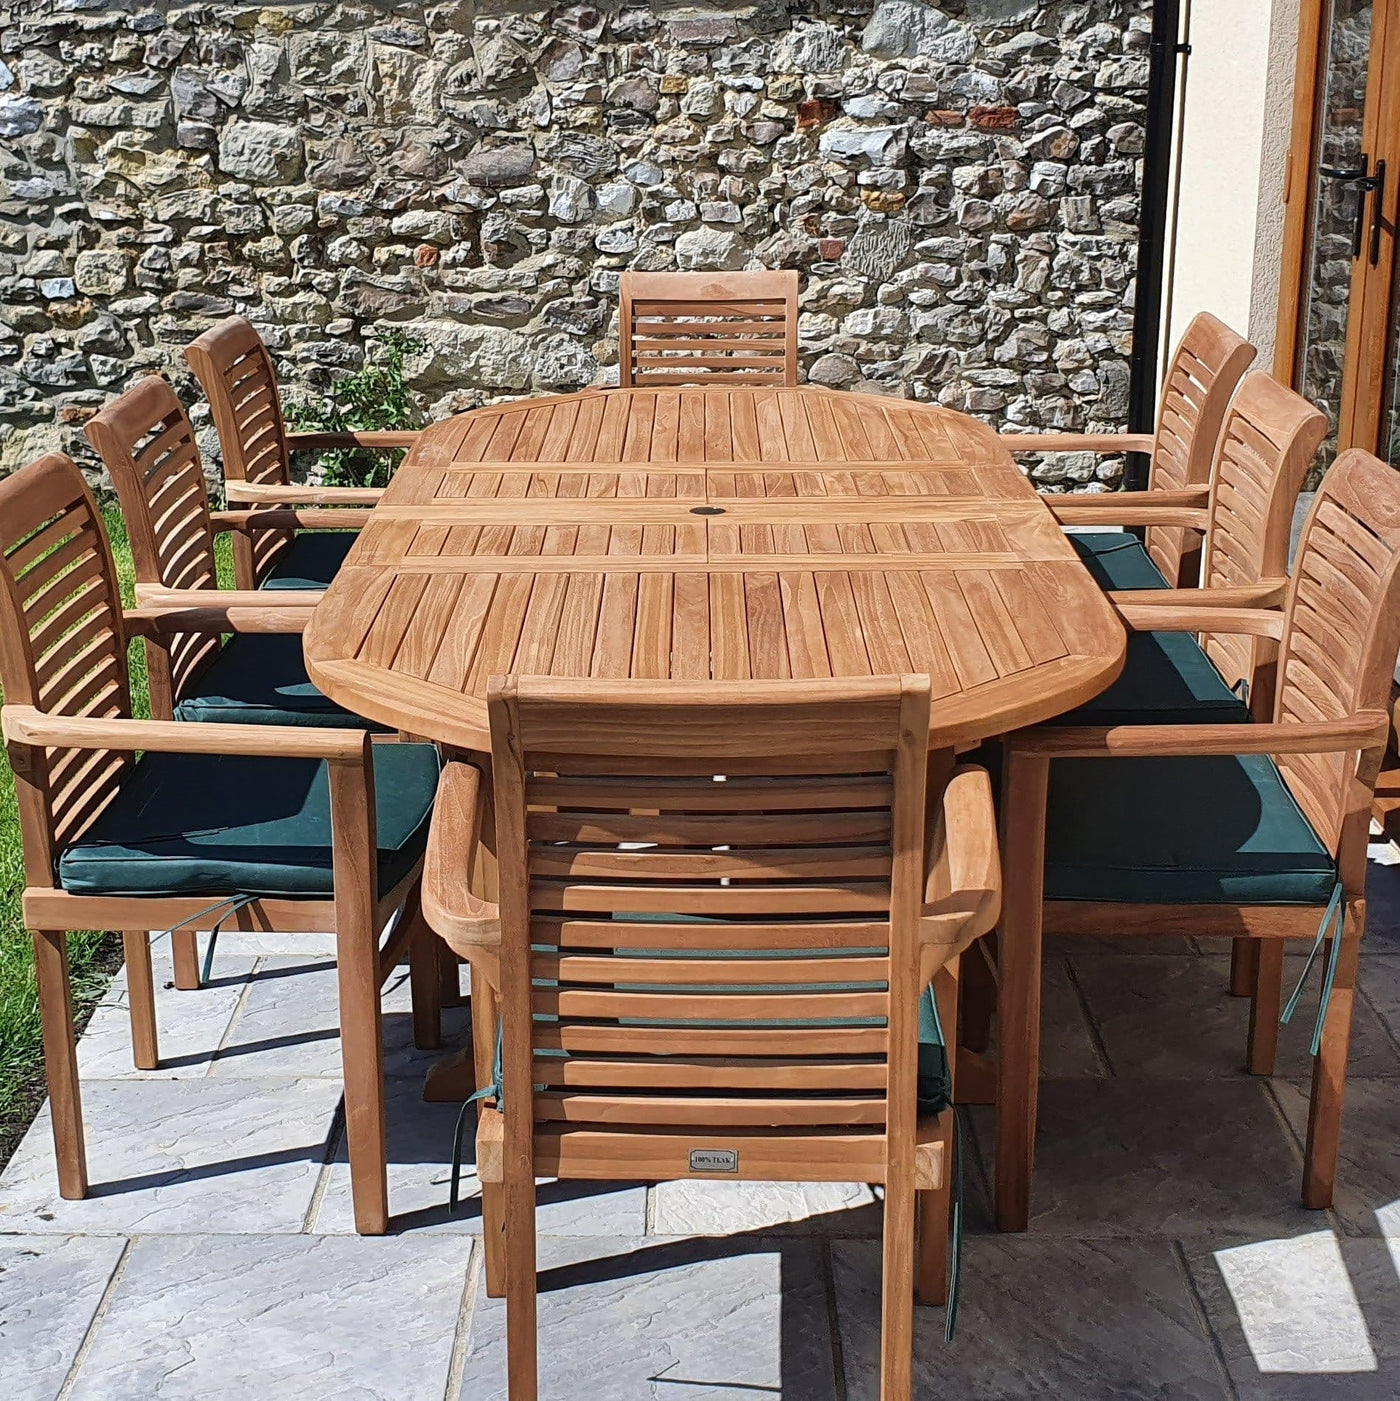 A Premium Teak Oval 180-240cm Garden Furniture Set with 8 Oxford Stacking Chairs, cushions included, set on a patio against a stone wall.